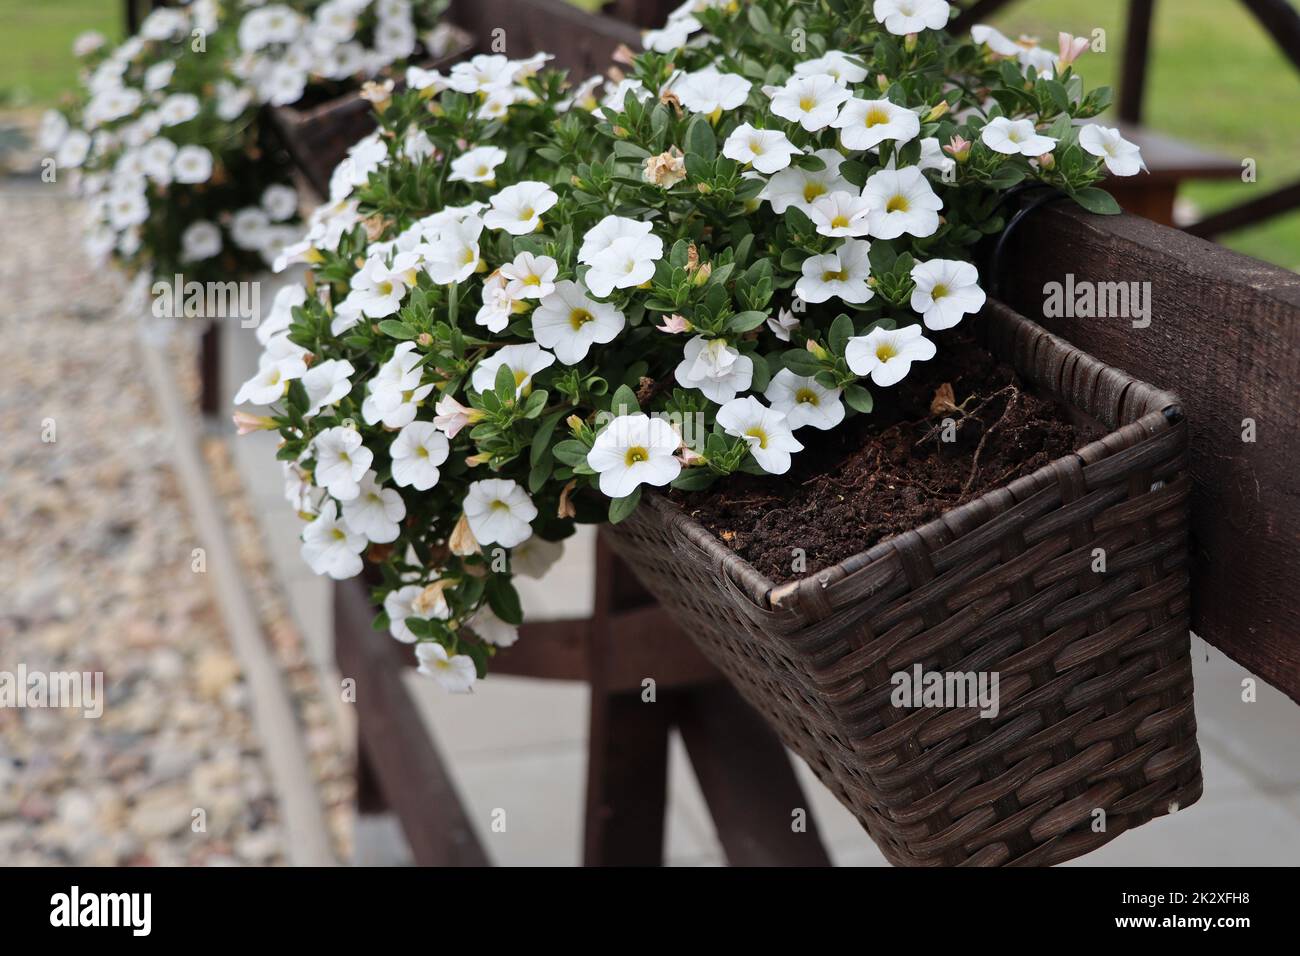 A beautiful garden window box planted with white summer flowers Stock Photo